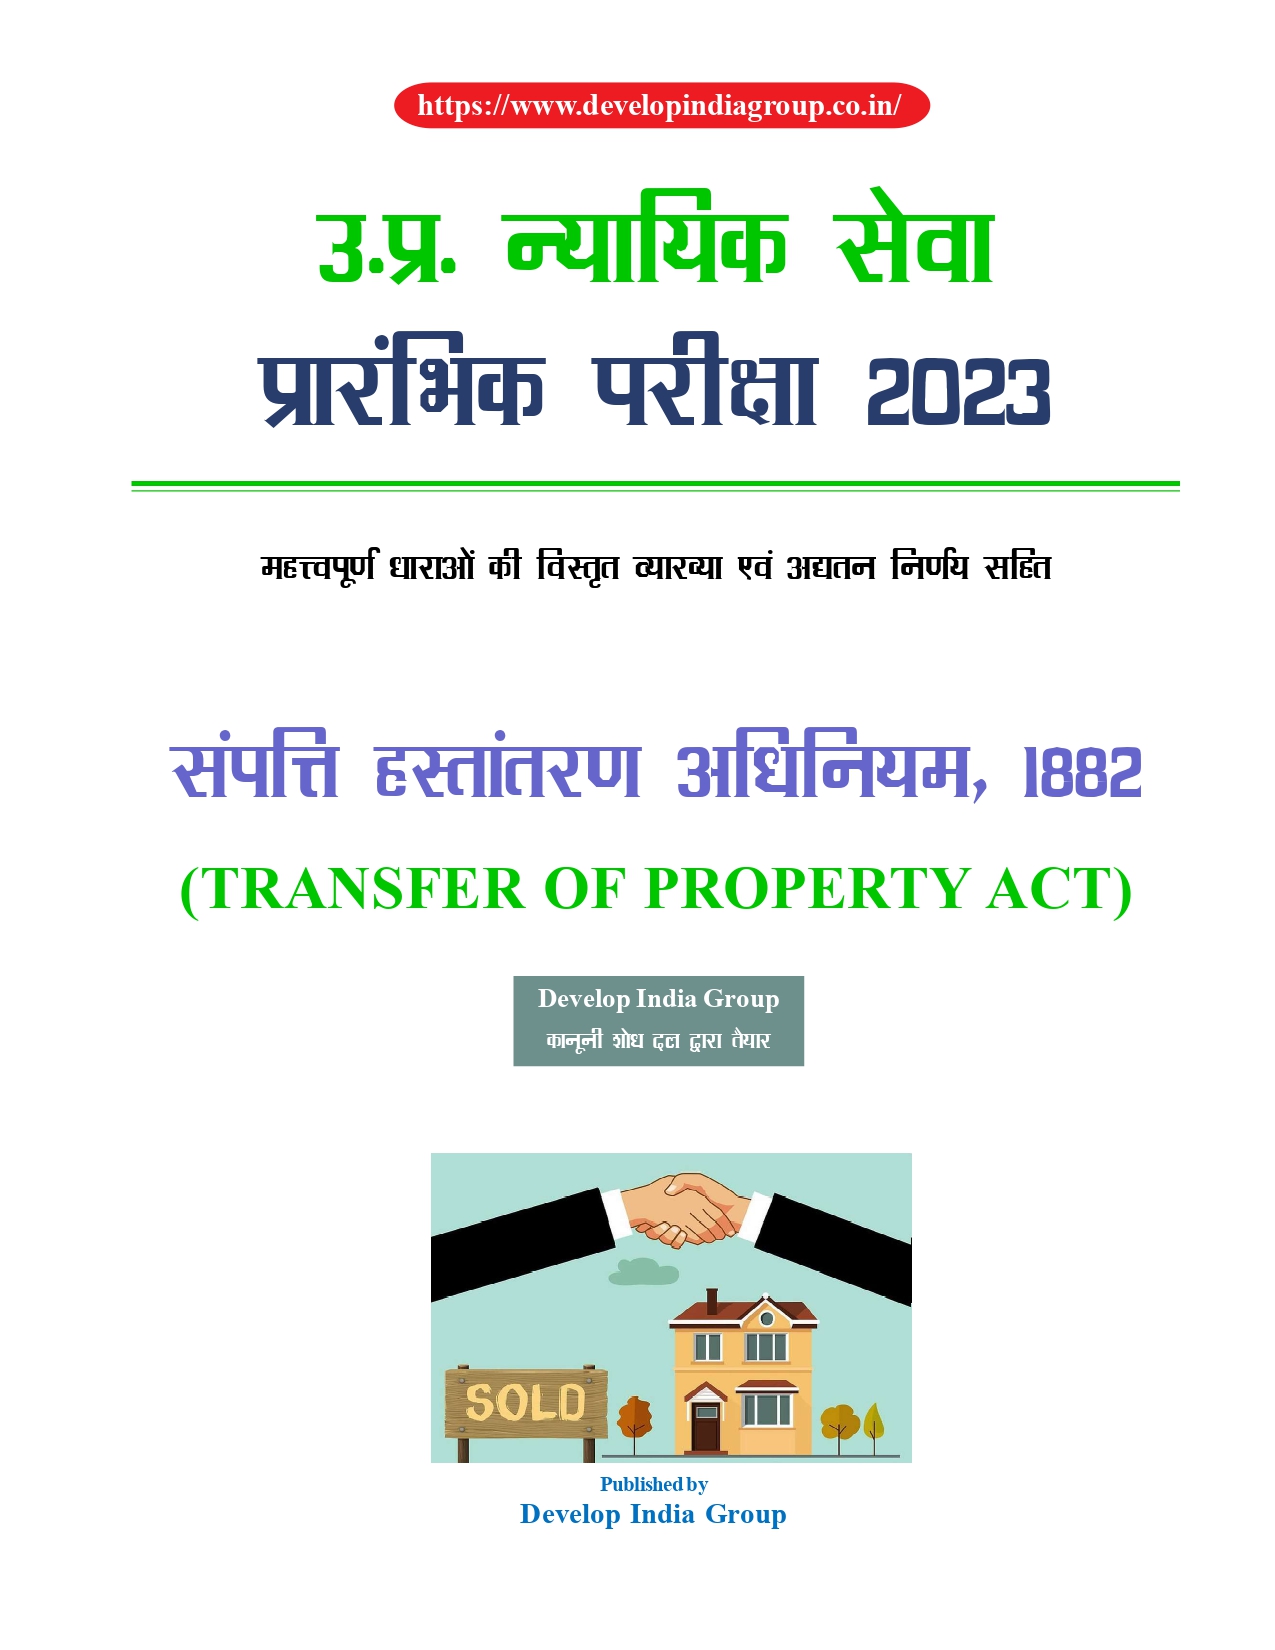 transfer of property act 44 in hindi